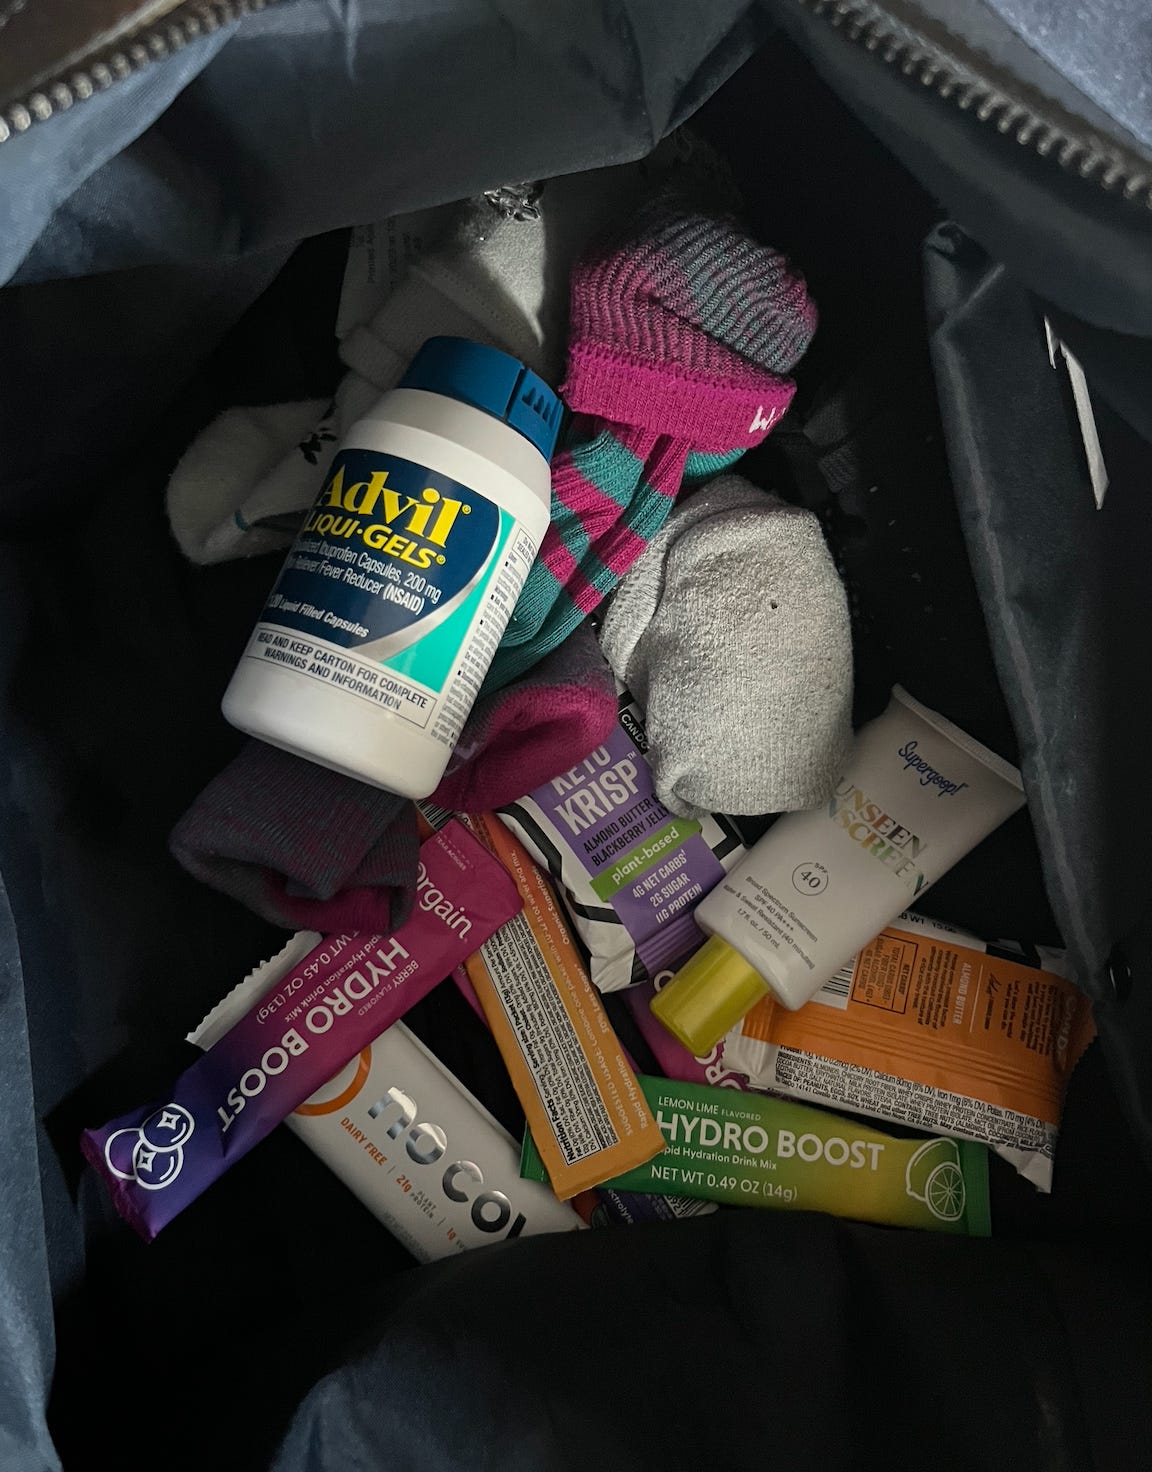  The inside of Amber's duffle bag. It has a bottle of Advil, a few pairs of socks, sunscreen, hydration powder sticks, and snack bars.